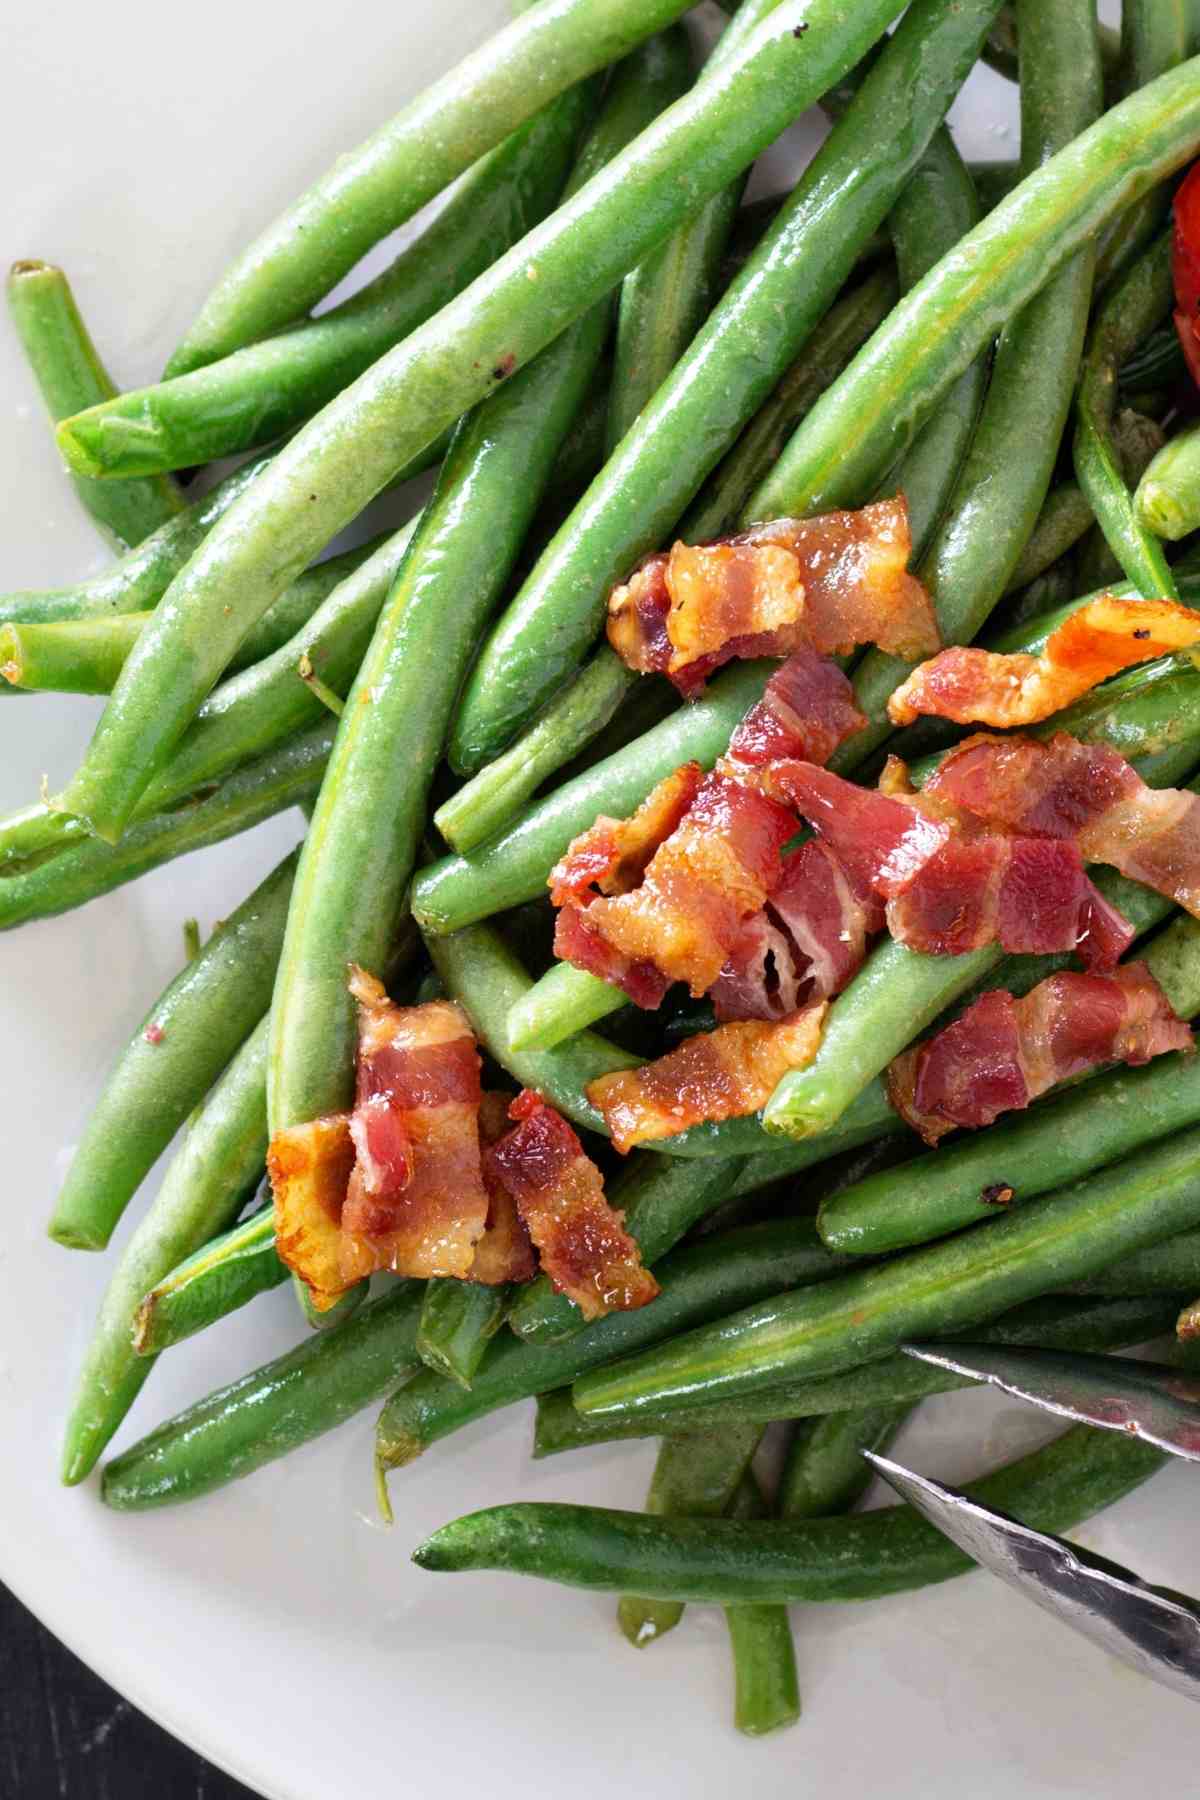 These Crack Green Beans are absolutely delicious! They’re crispy, sweet, and savory. If you can’t get your kids to eat their veggies, give this recipe a try!